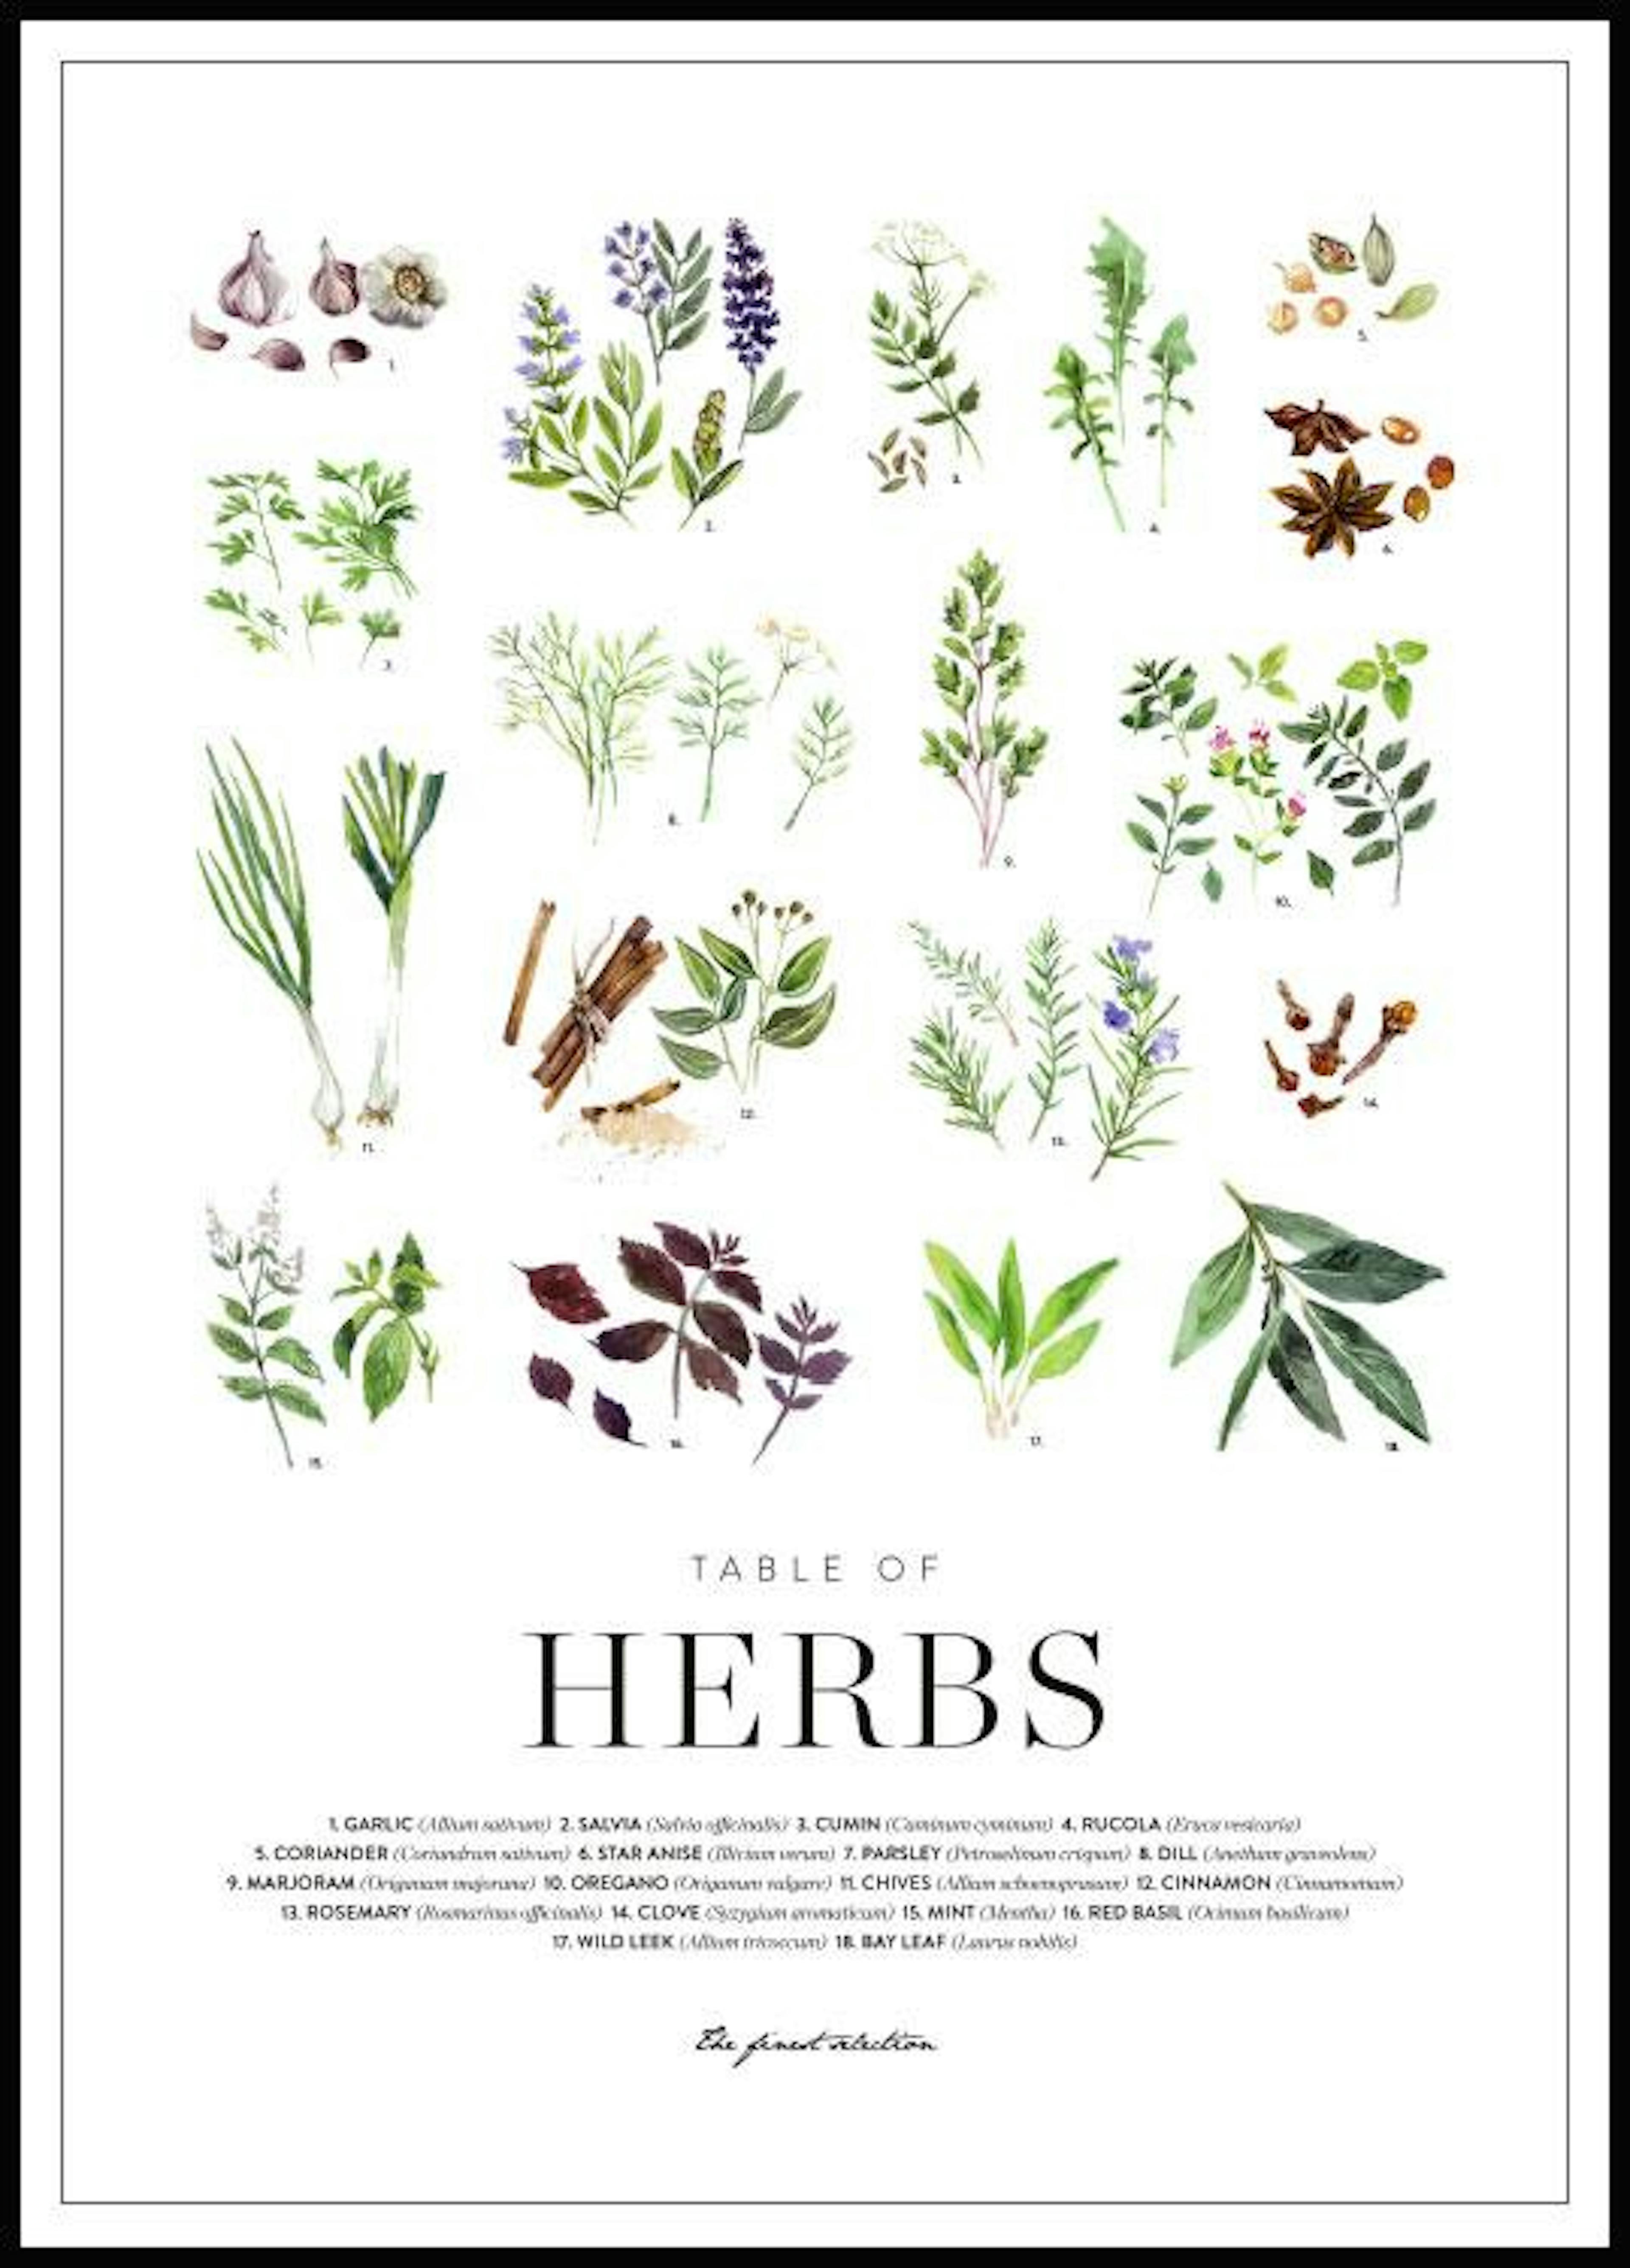 Herbs Poster 0